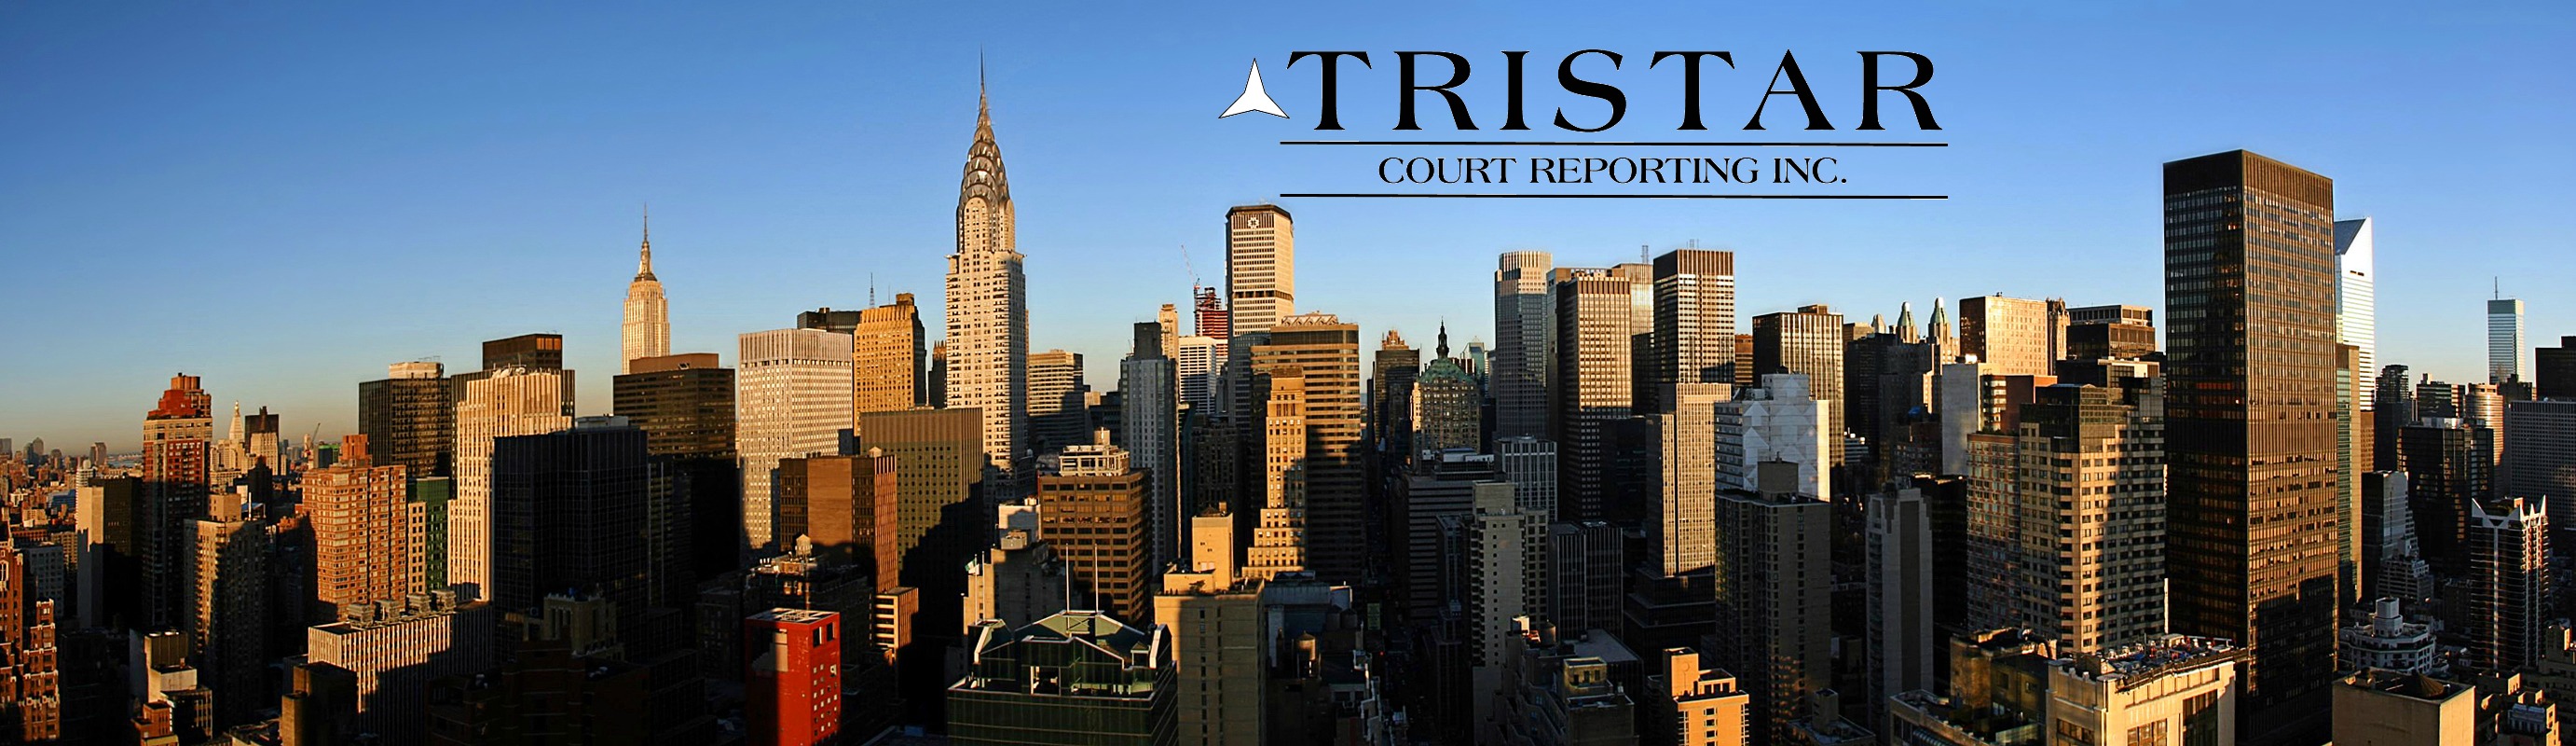 Tristar Court Reporting